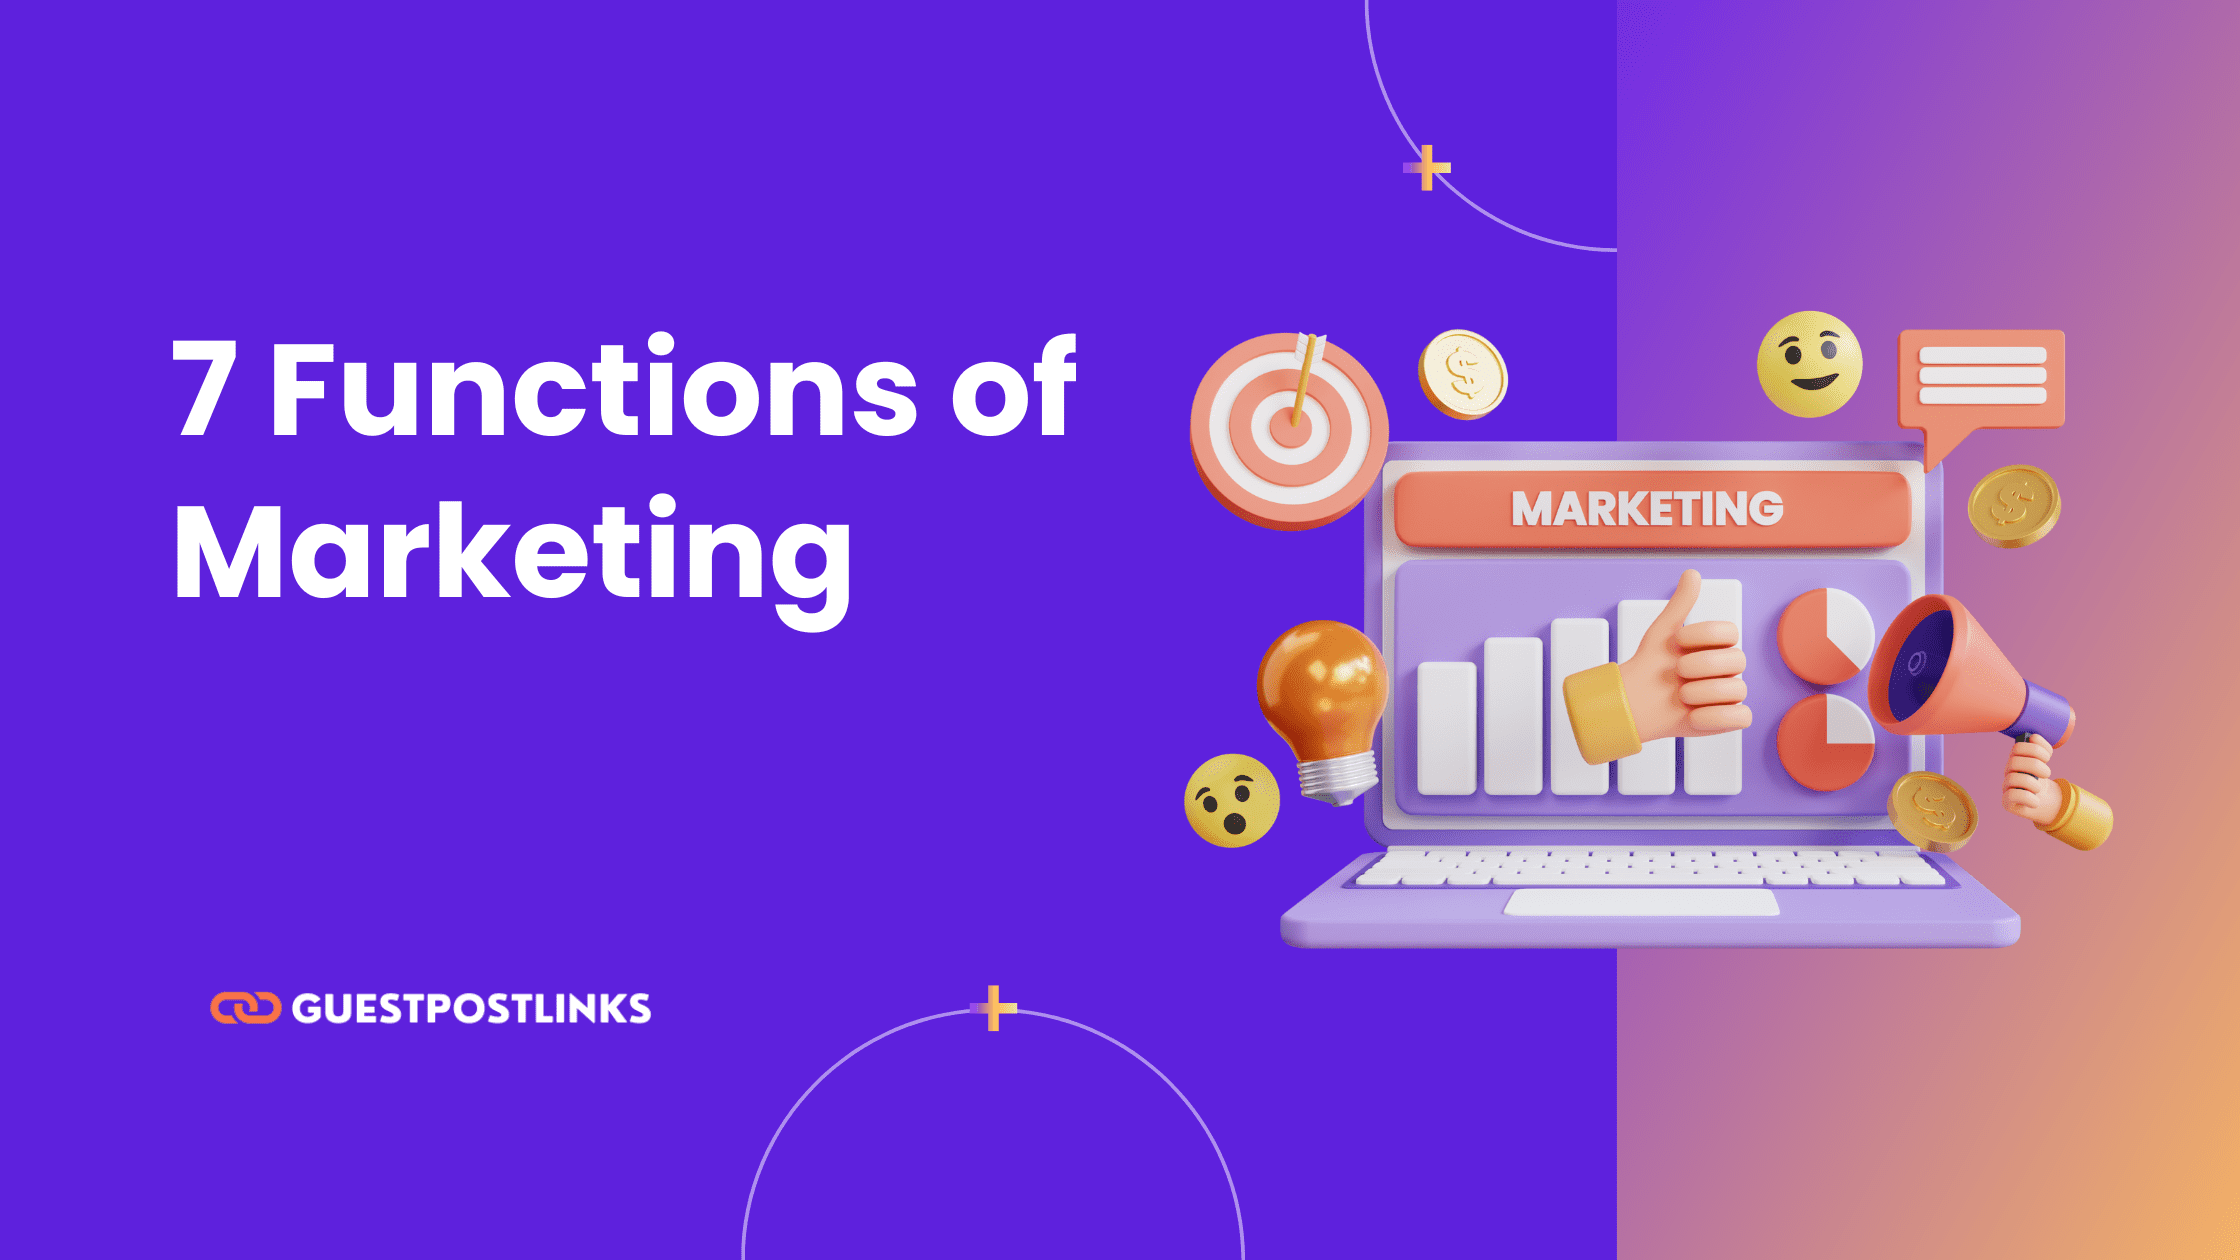 7 Functions of Marketing